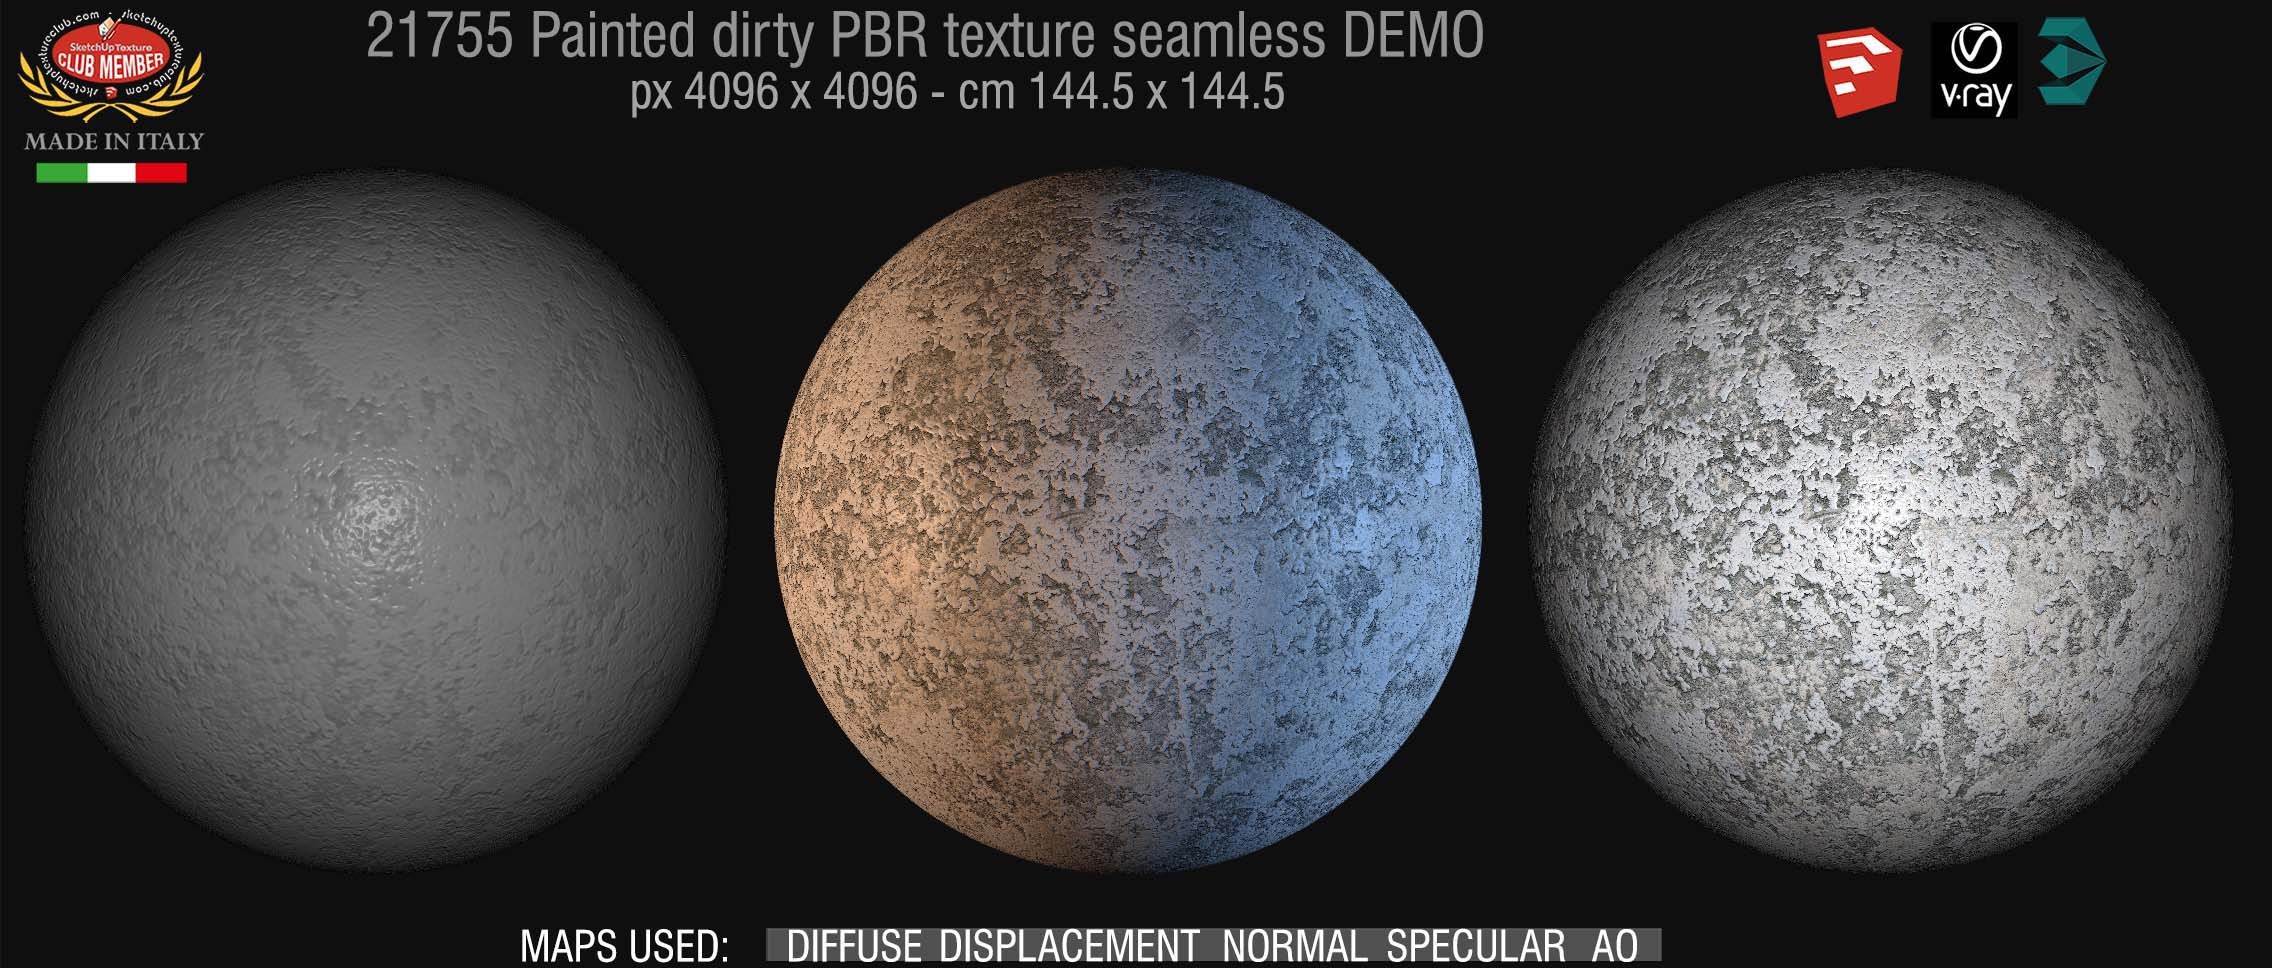 21755 Painted dirty metal PBR texture seamless DEMO